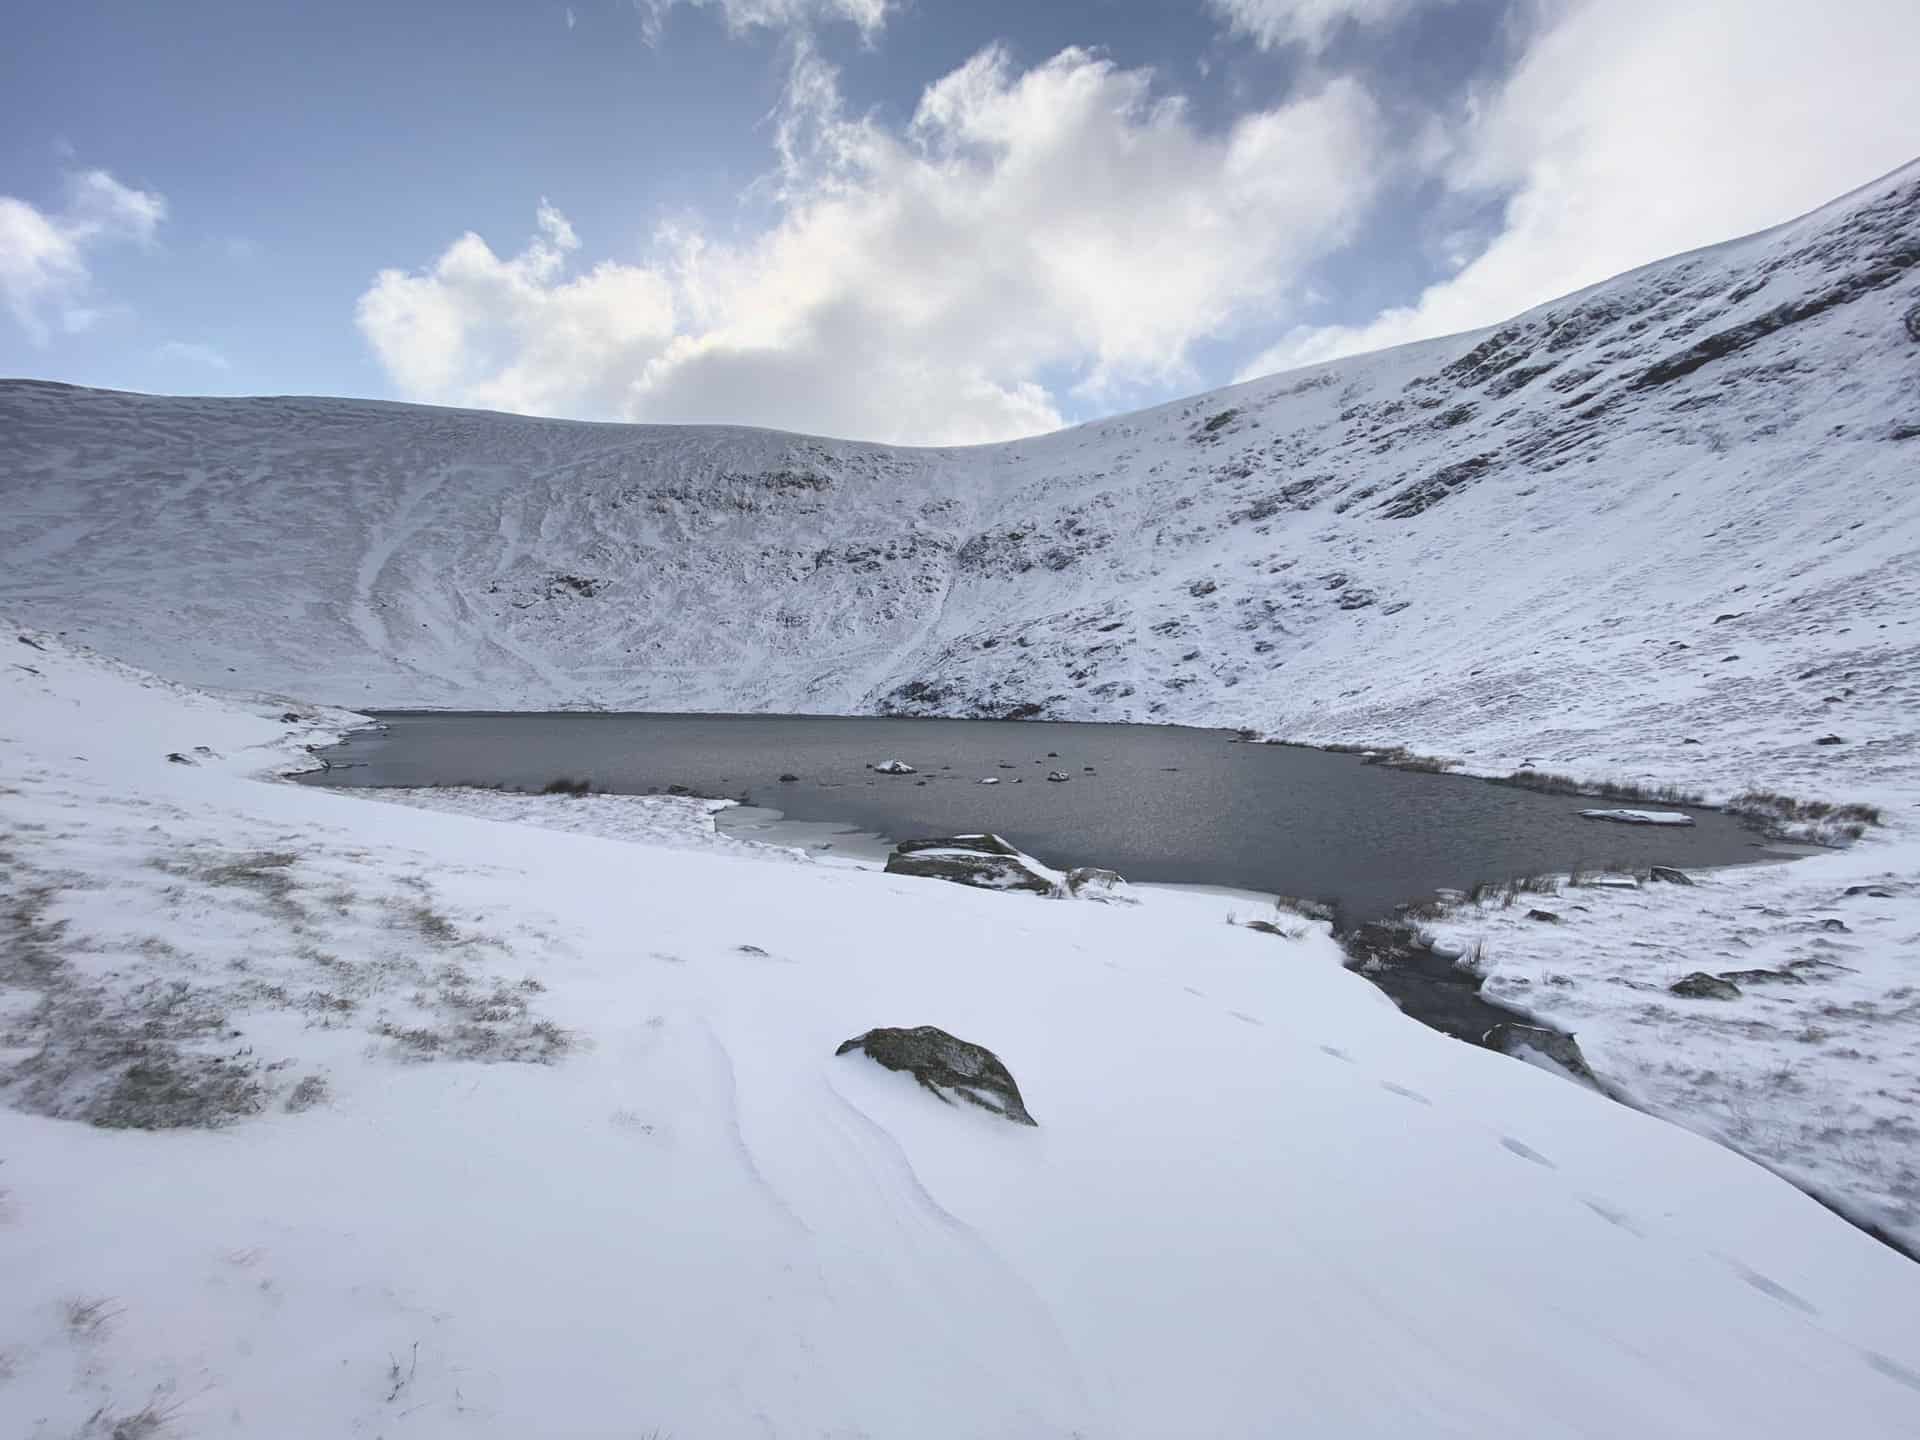 Bowscale Tarn, one of the highlights of the Bowscale Tarn walk.